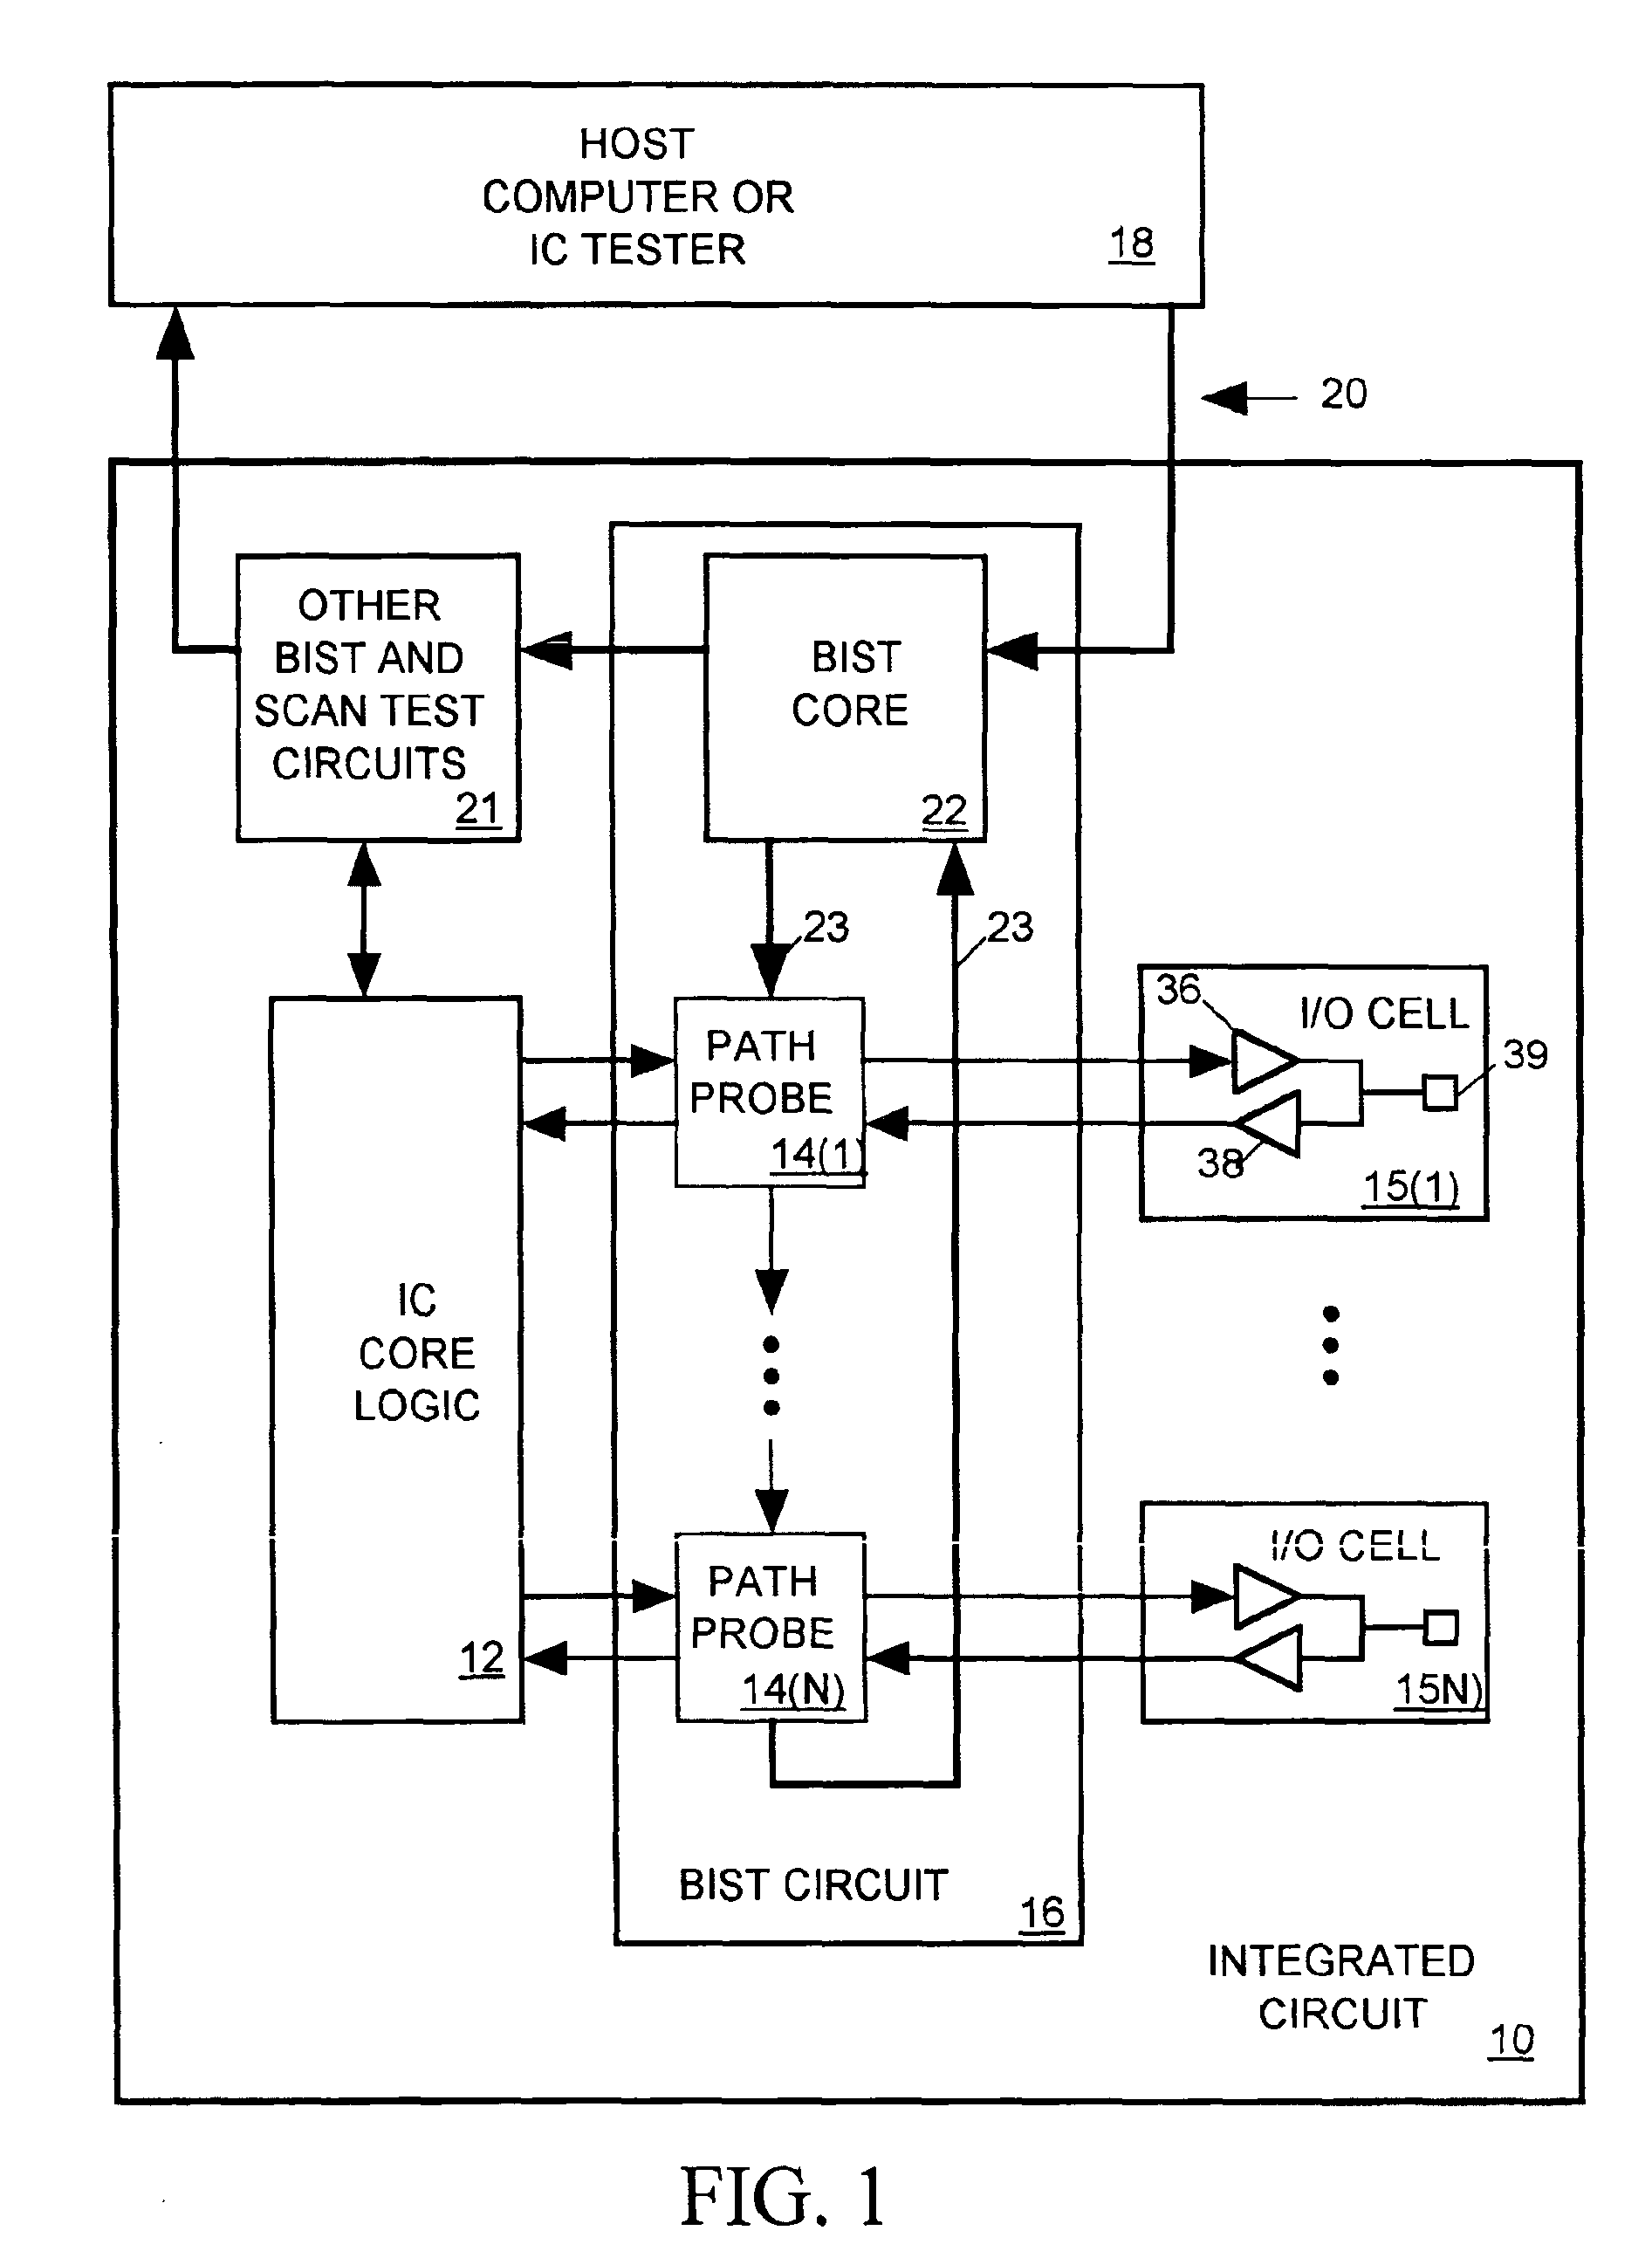 BIST circuit for measuring path delay in an IC